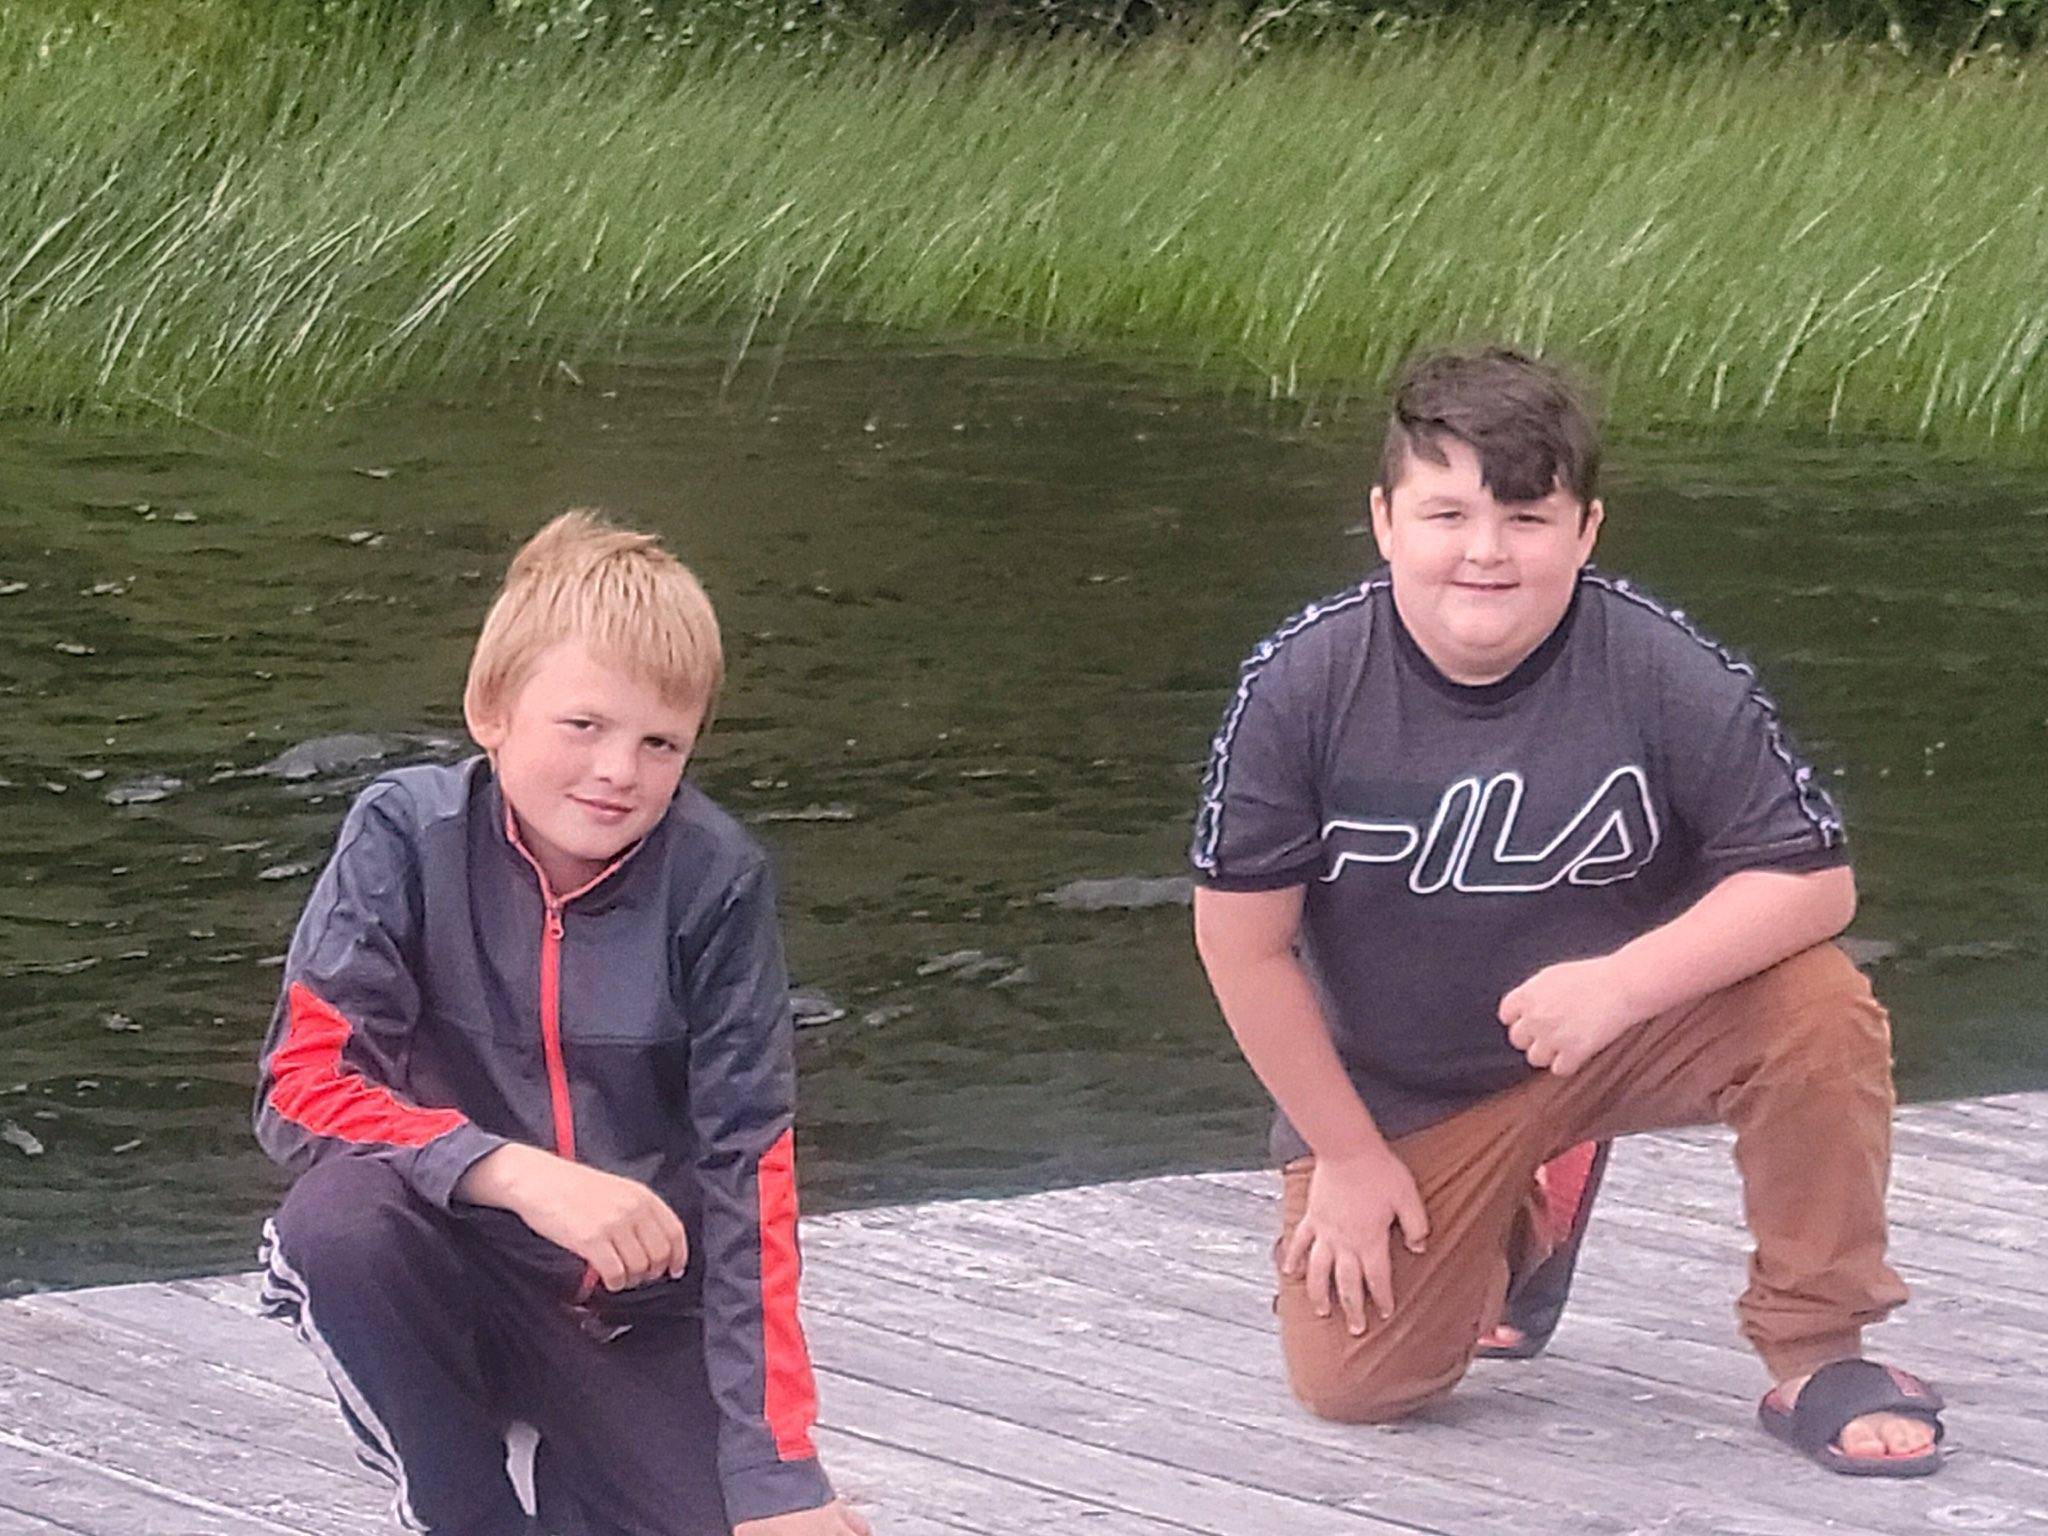 Photo provided
Mason Slattum, left, and his cousin Blake Ogden saved a 3-year-old from drowning in Deer Lake thanks to their quick thinking.